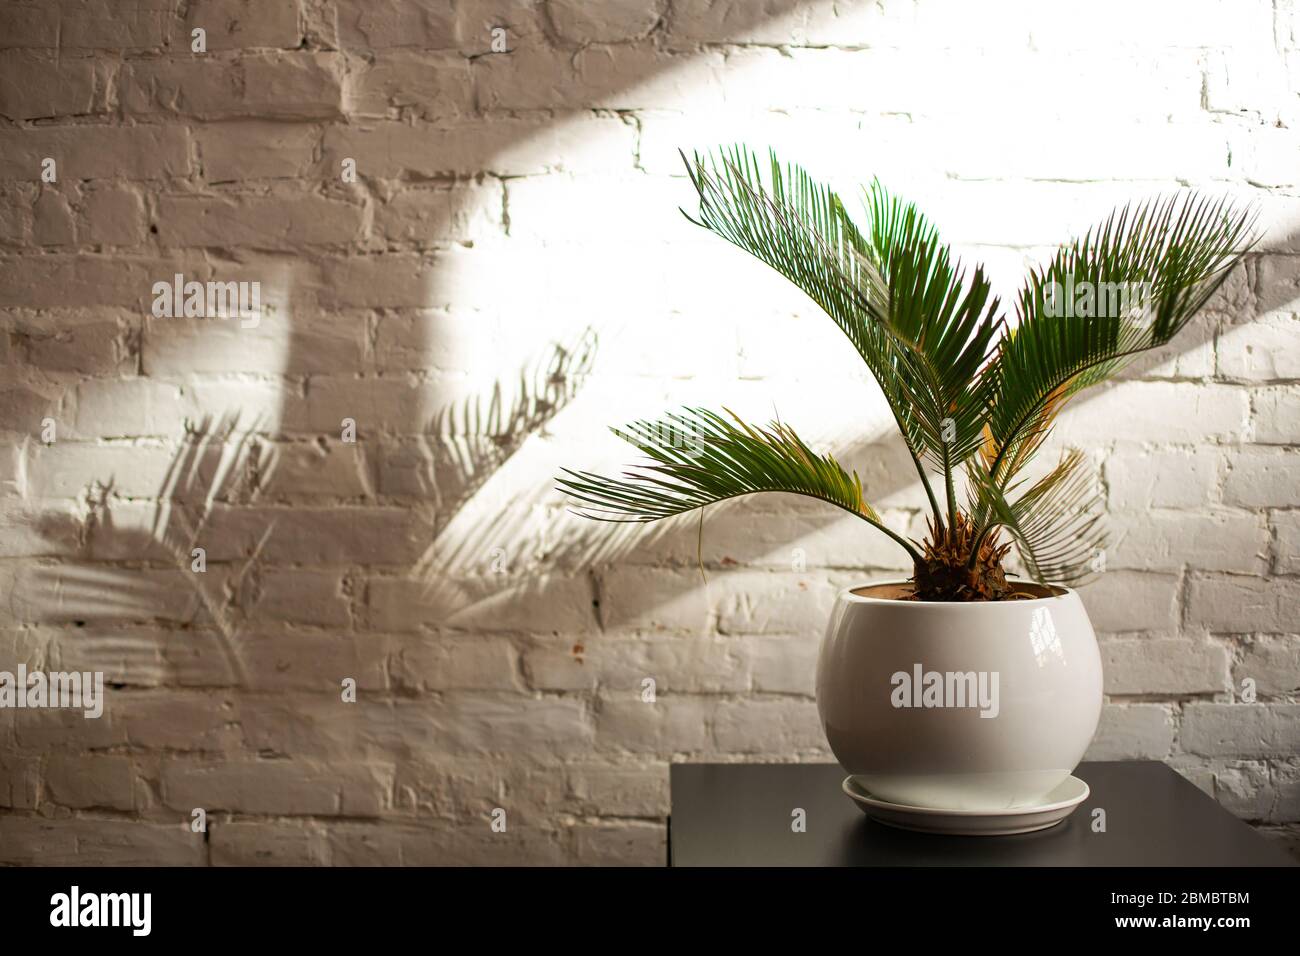 Decorative Indoor Flower In A Pot Casts A Shadow On A White Wall Cozy Room Interior Stock Photo Alamy